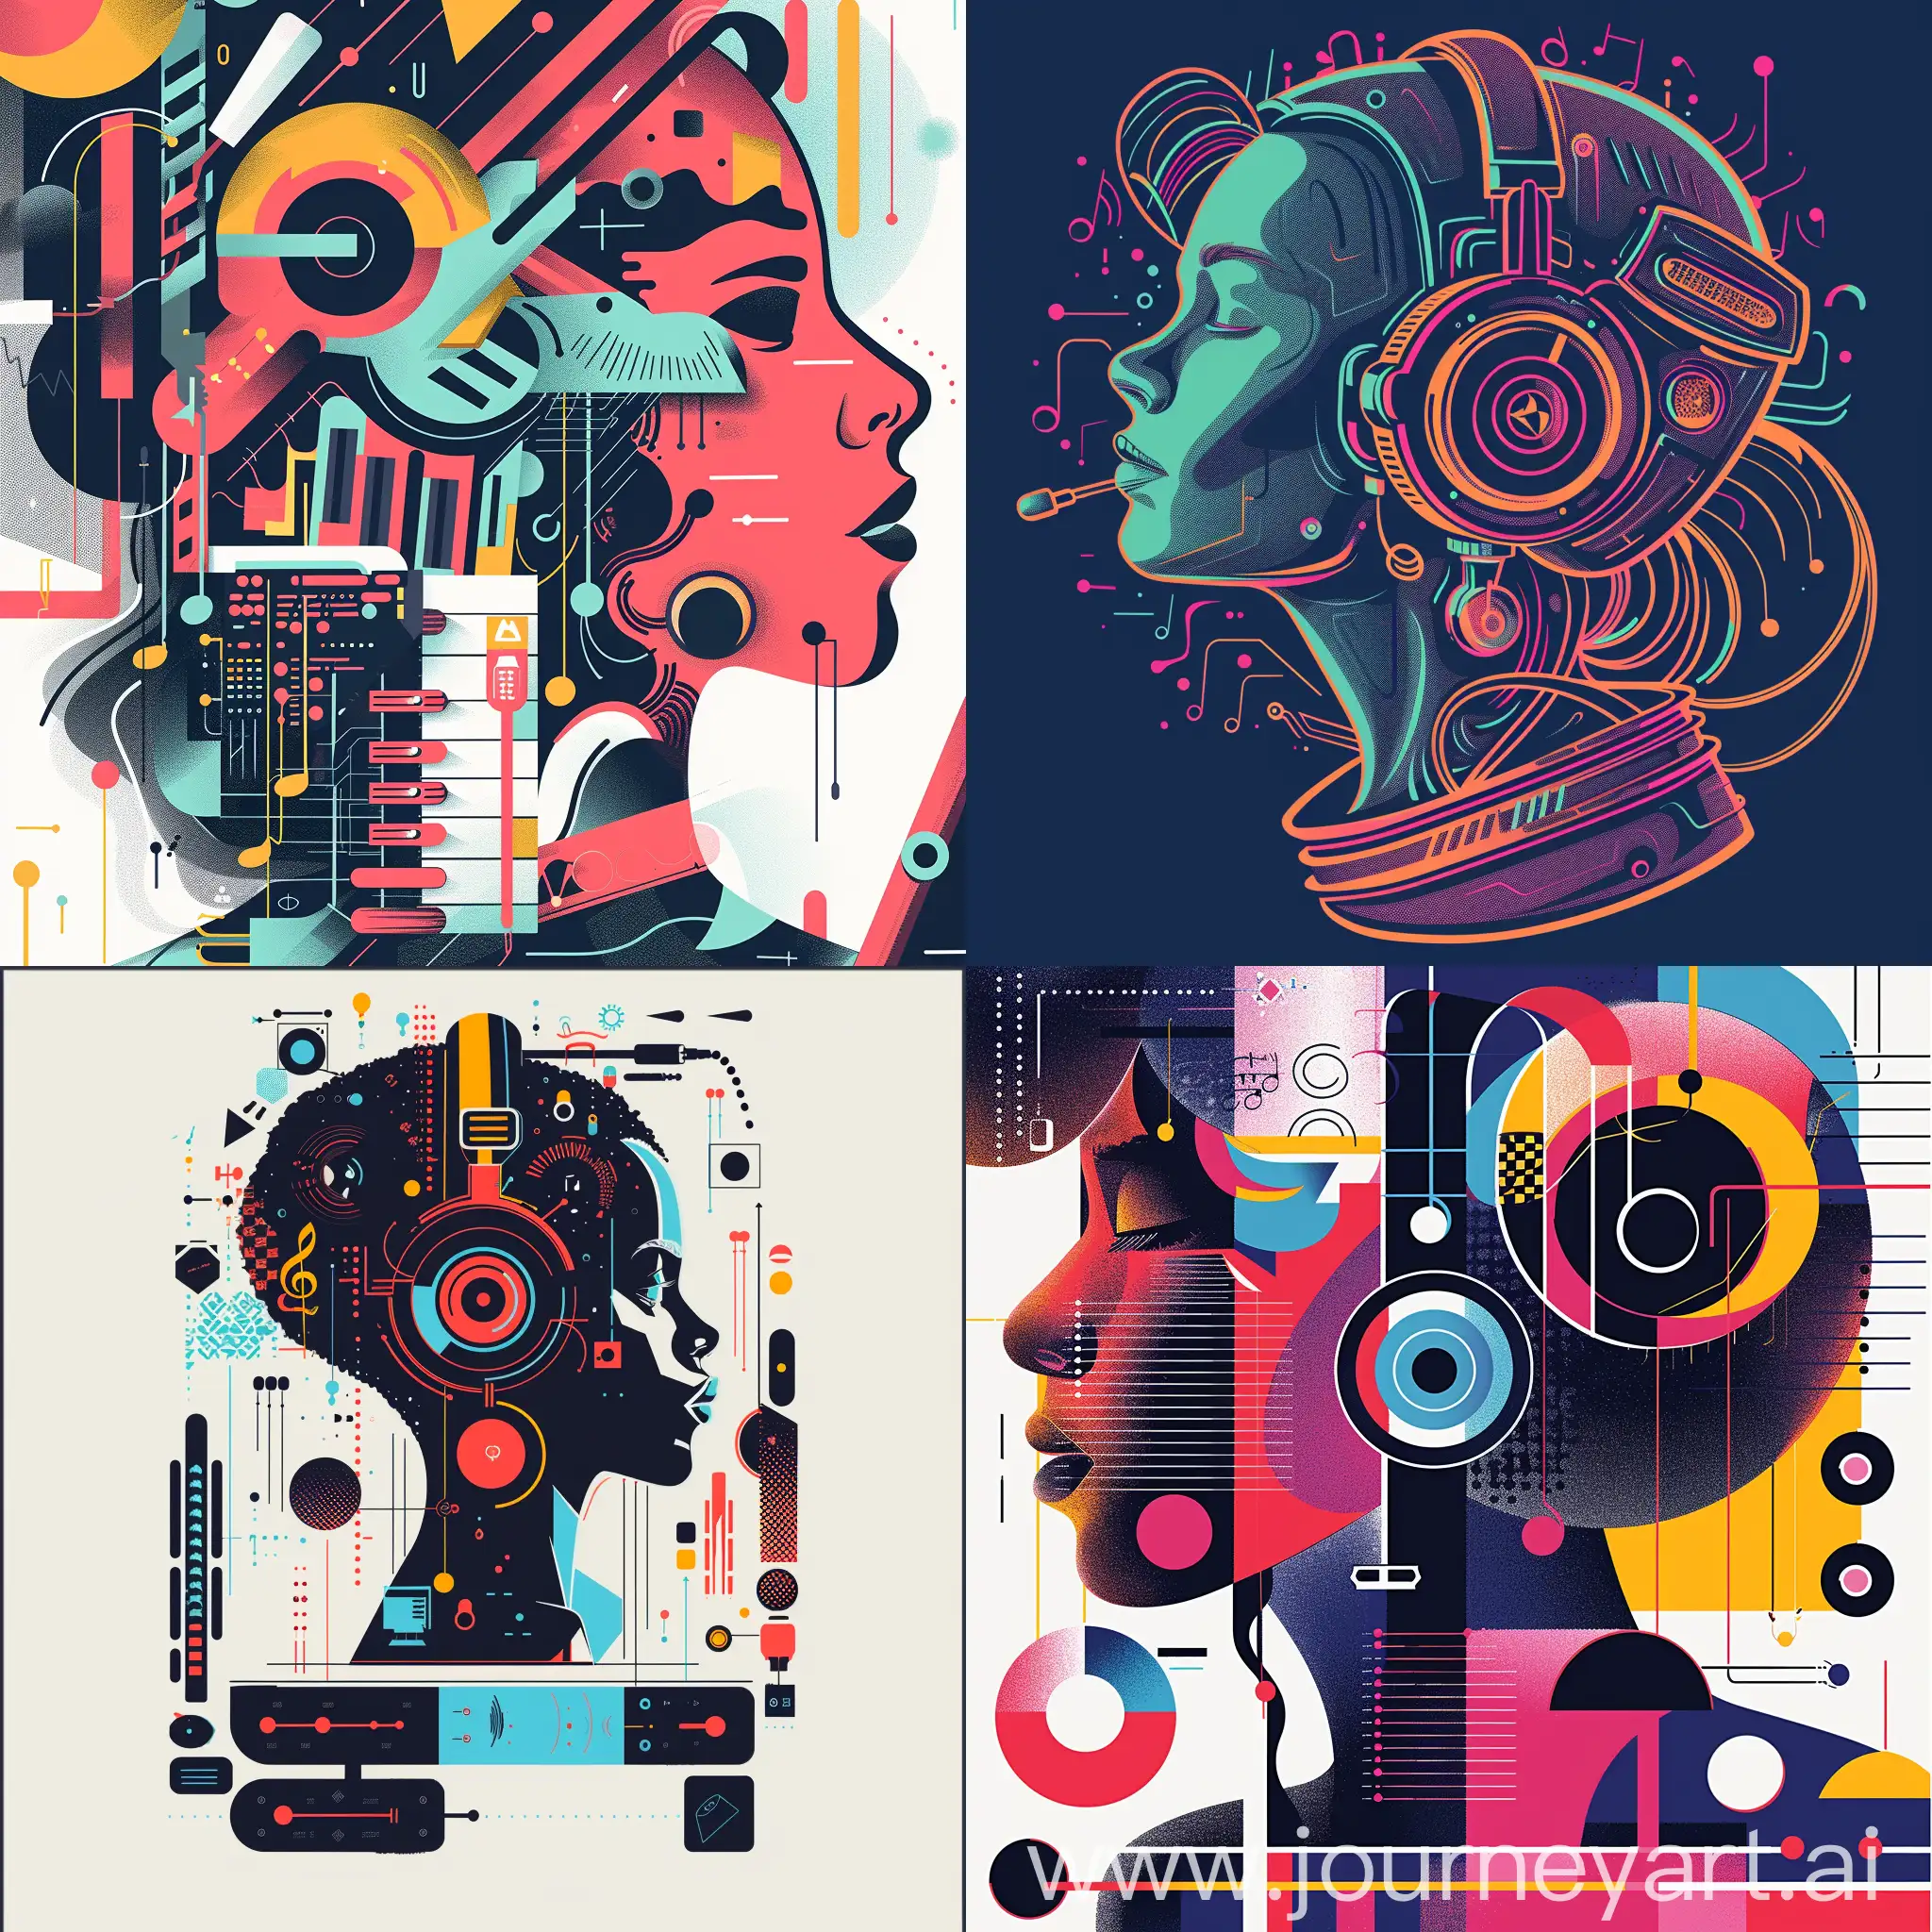 create a vector design on the topic "How Generative AI is Revolutionising the Music Industry" to be used in a blog post